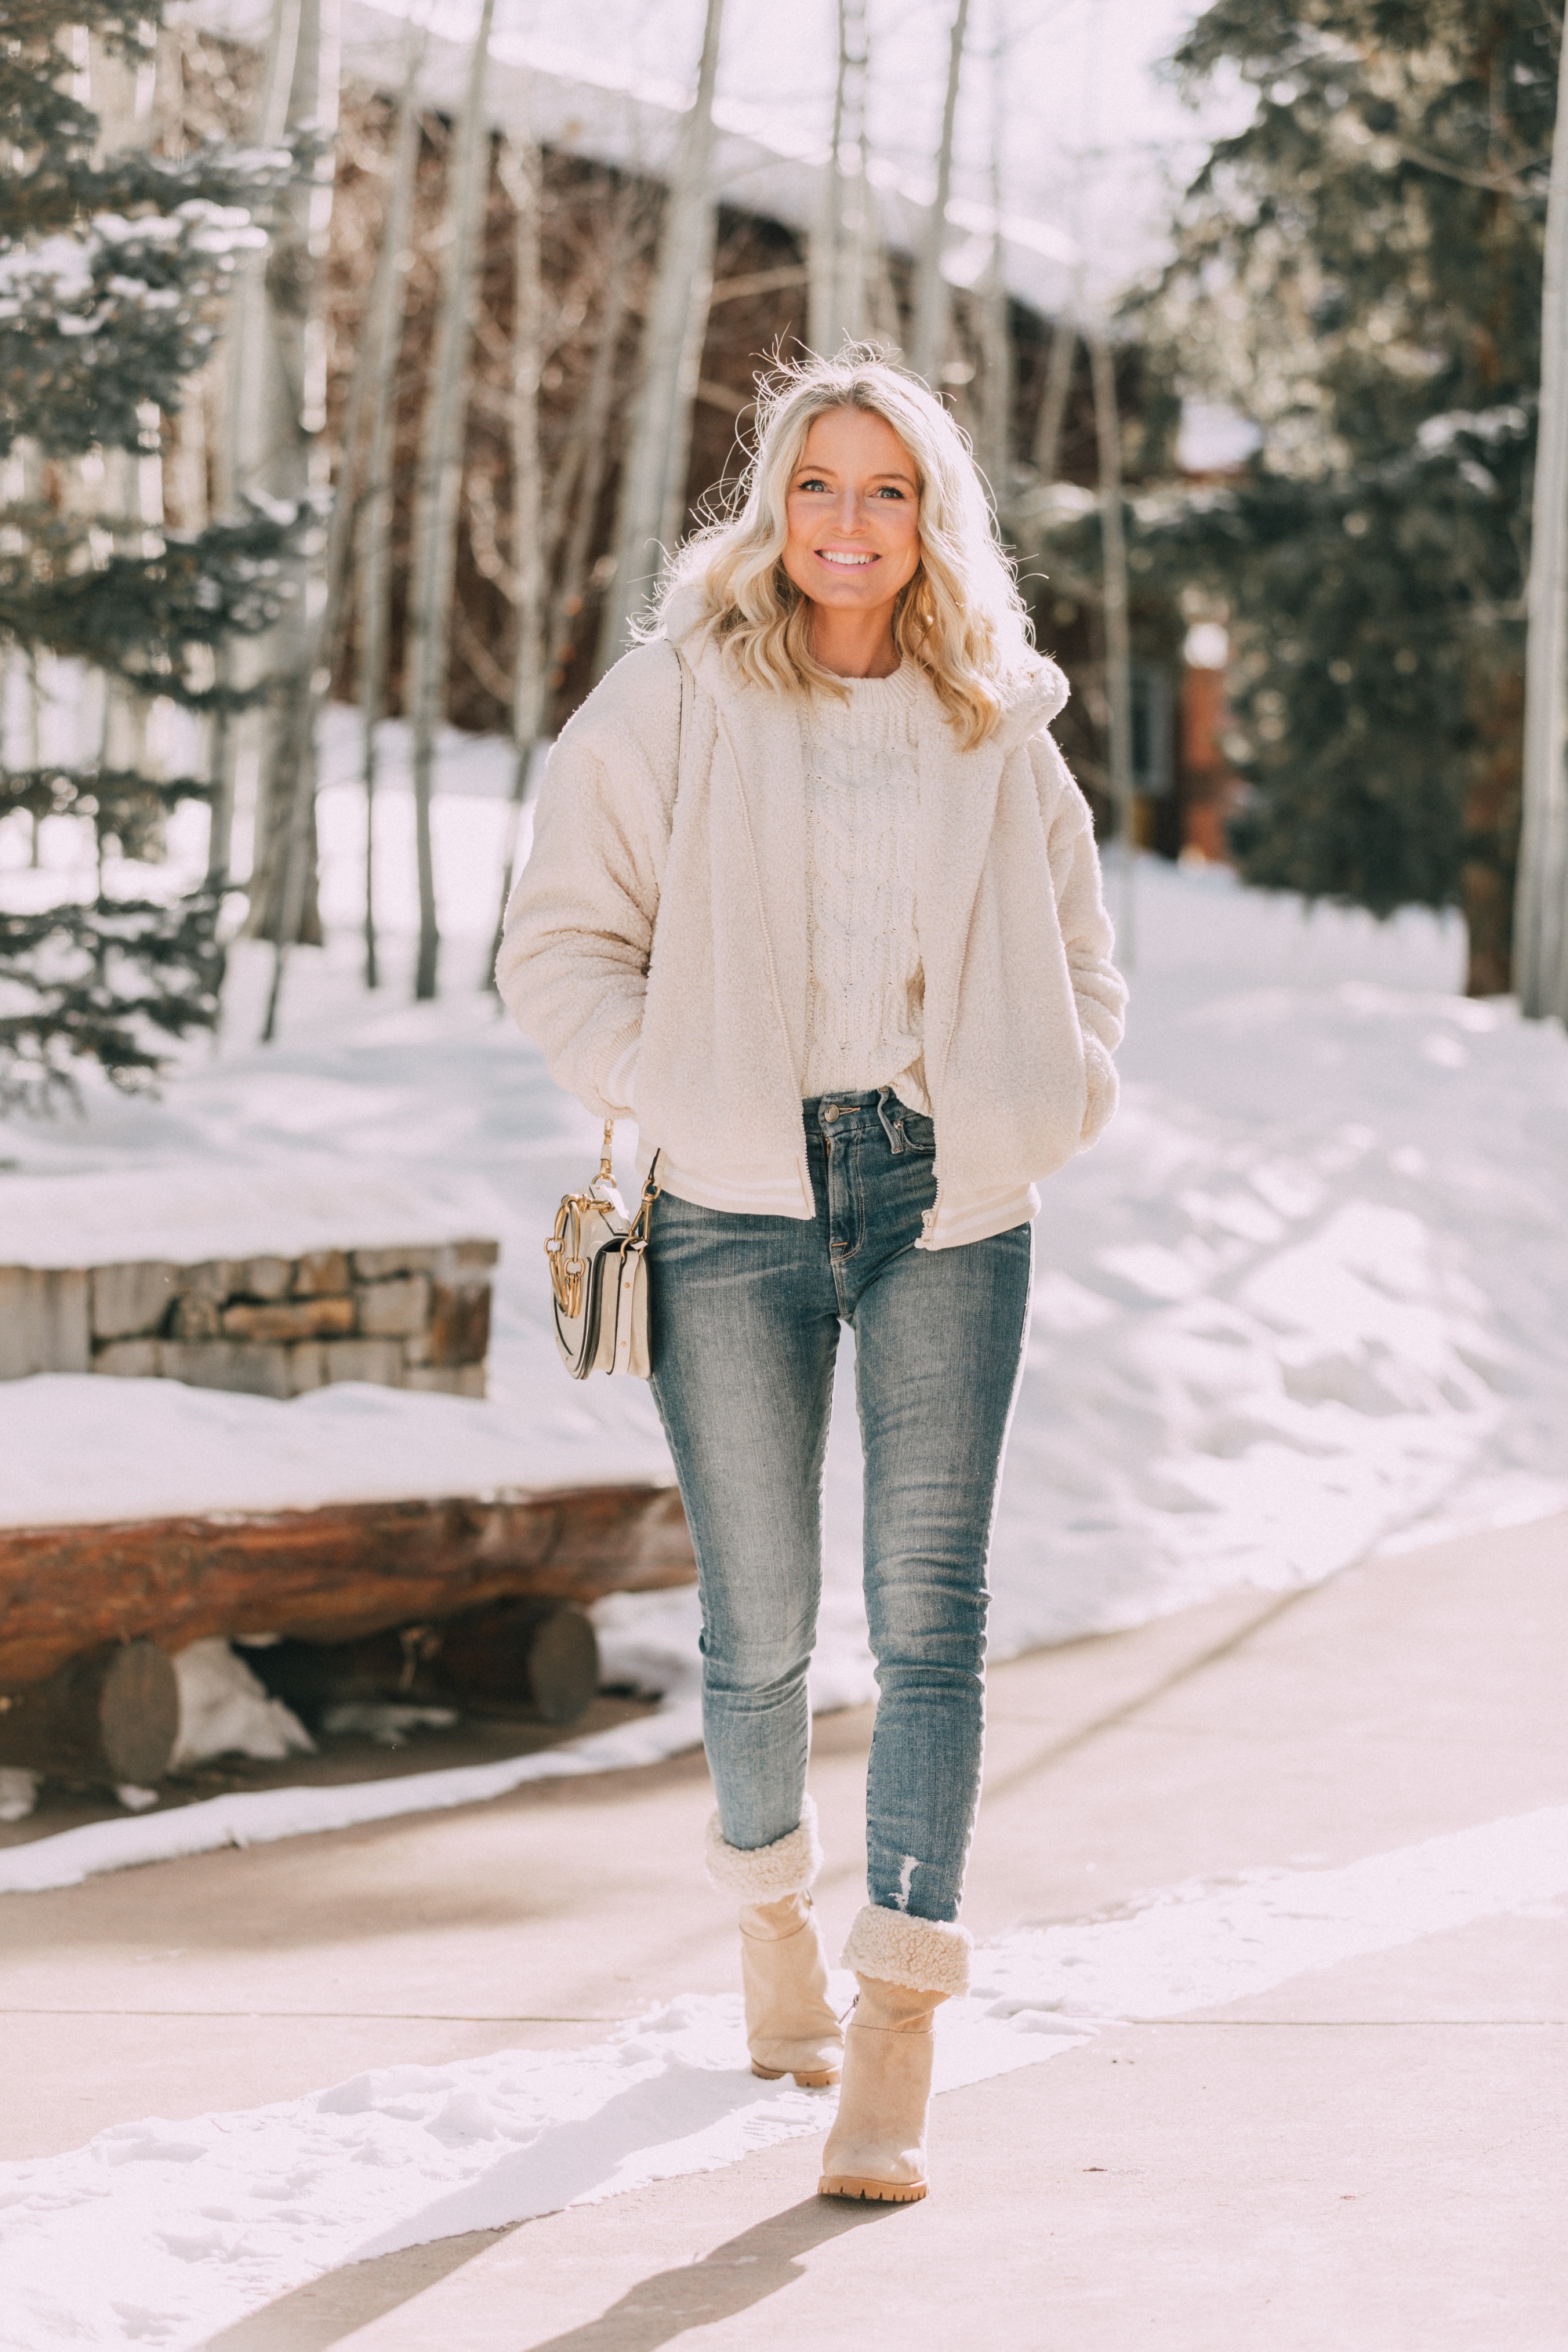 walmart fashion faux fur teddy Scoop jacket, white Scoop cable knit sweater, medium wash skinny jeans, faux shearling foldover boots from Walmart in Telluride, Colorado